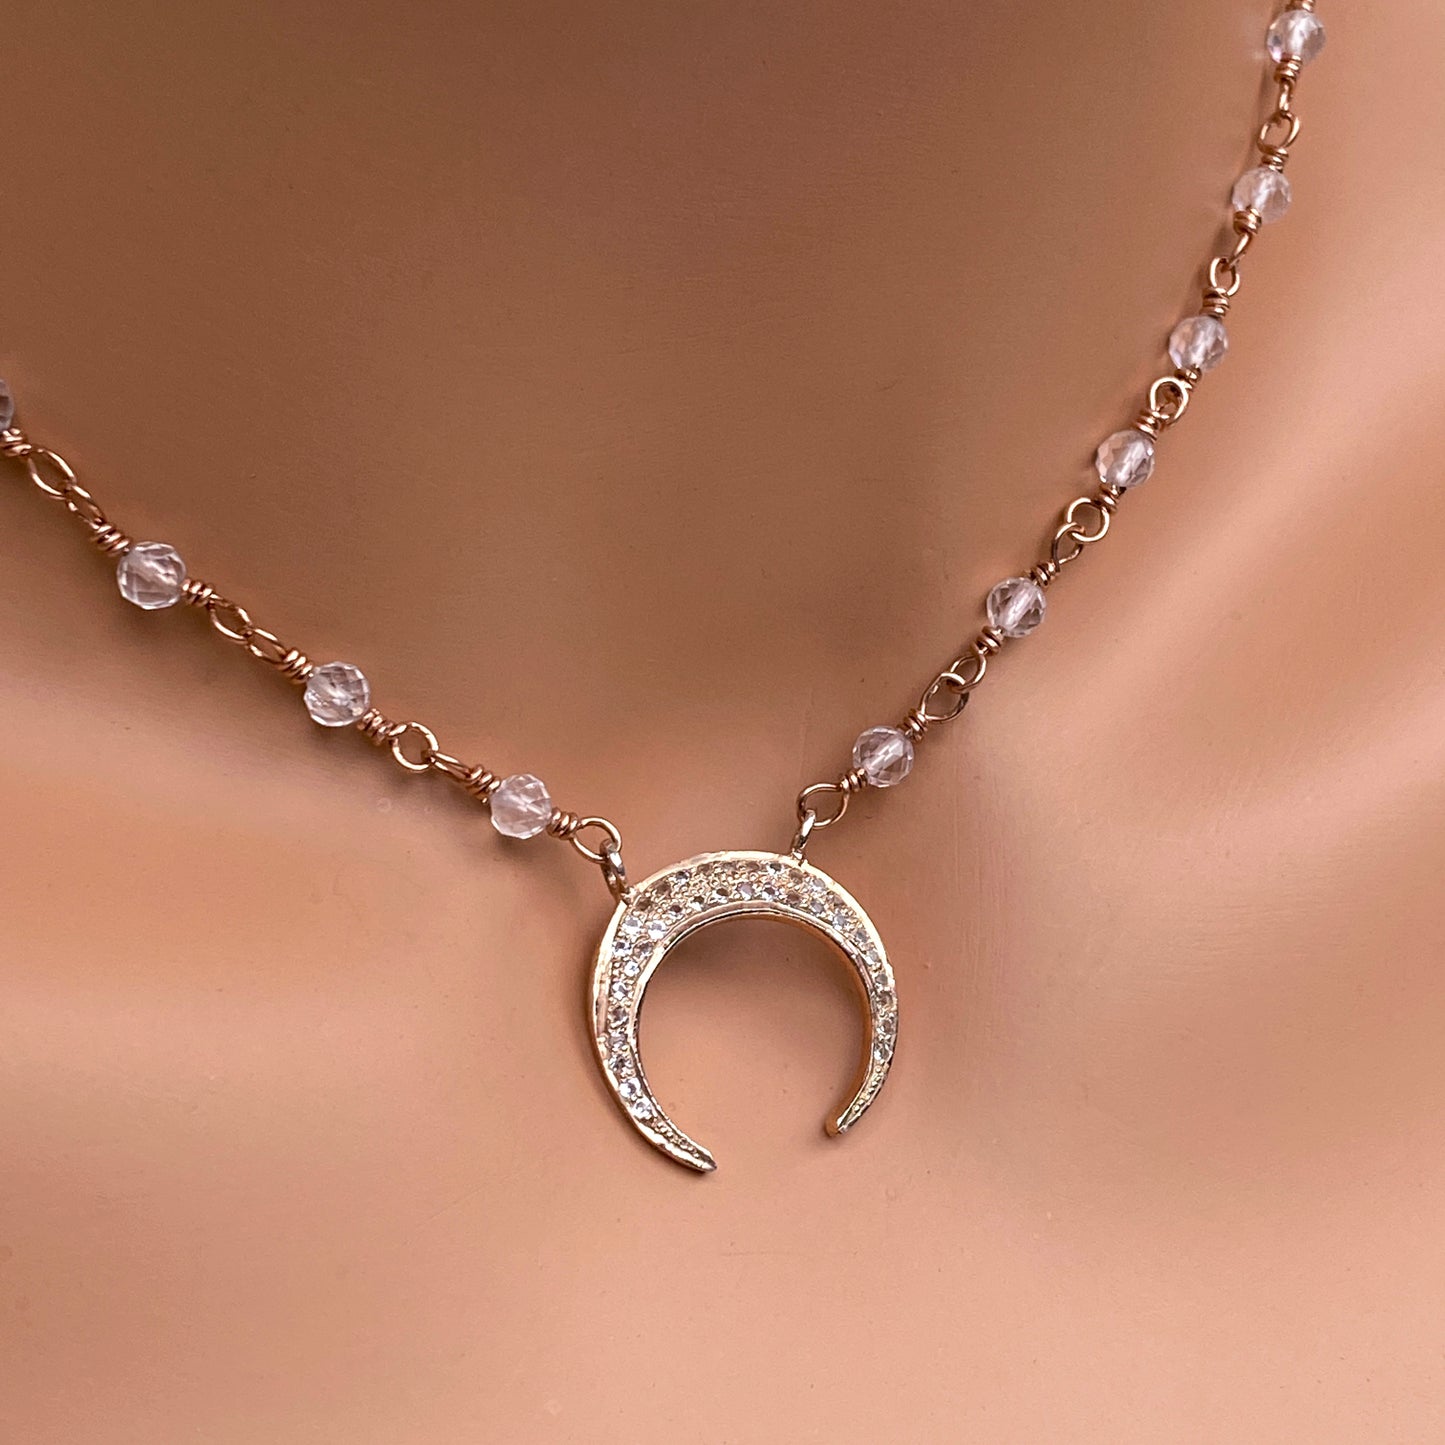 Pave White Topaz gemstones with Rose Gold Moon pendant chain necklace